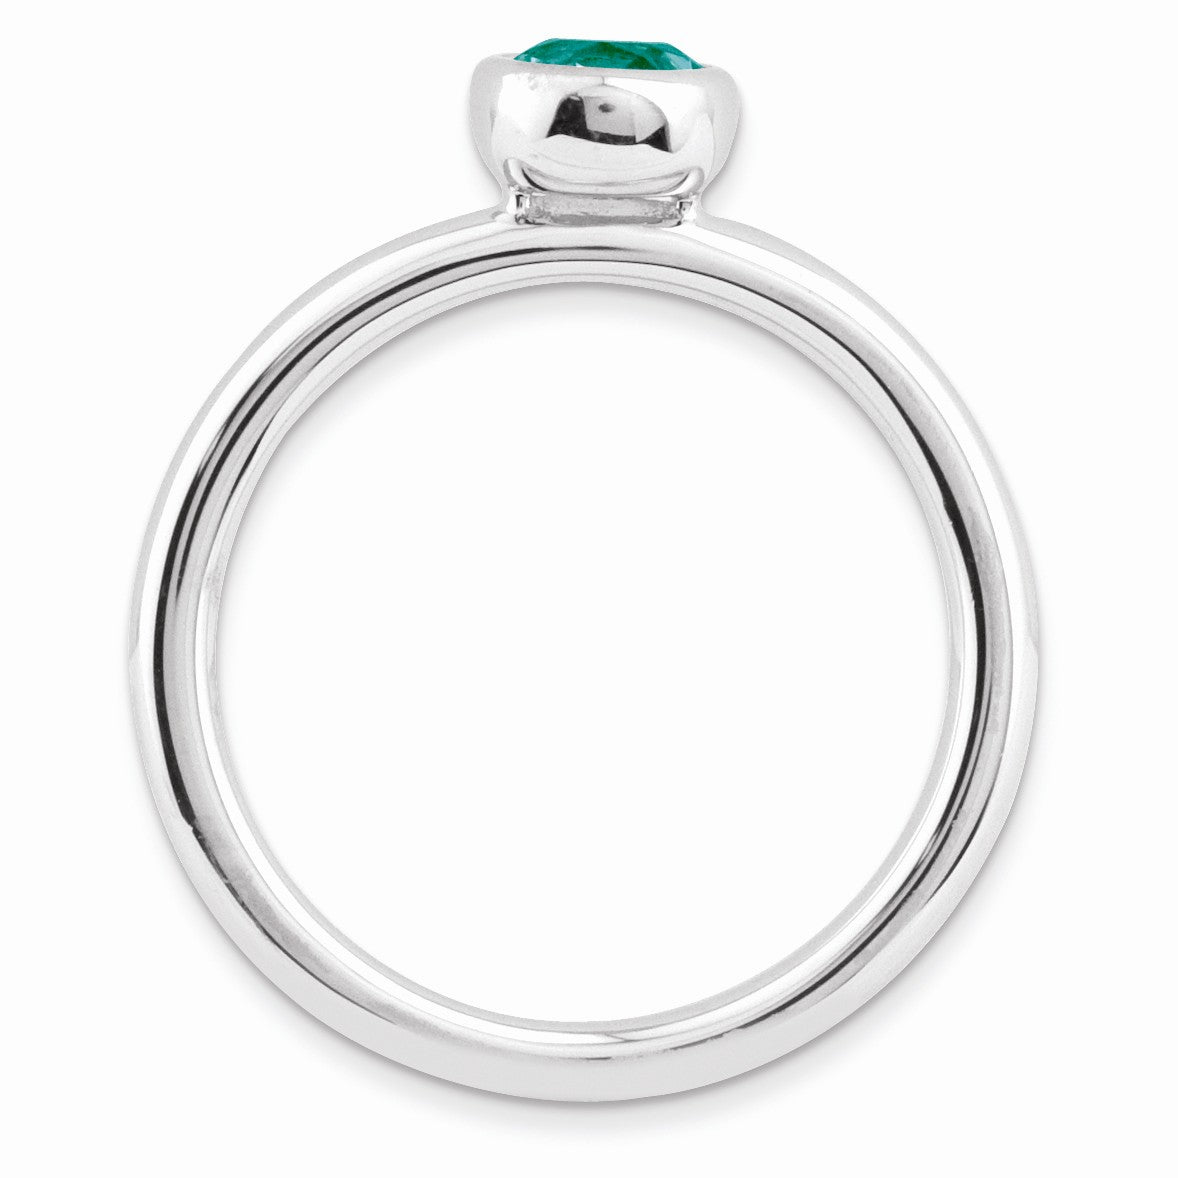 Alternate view of the Stackable Low Profile 5mm Created Emerald Silver Ring by The Black Bow Jewelry Co.